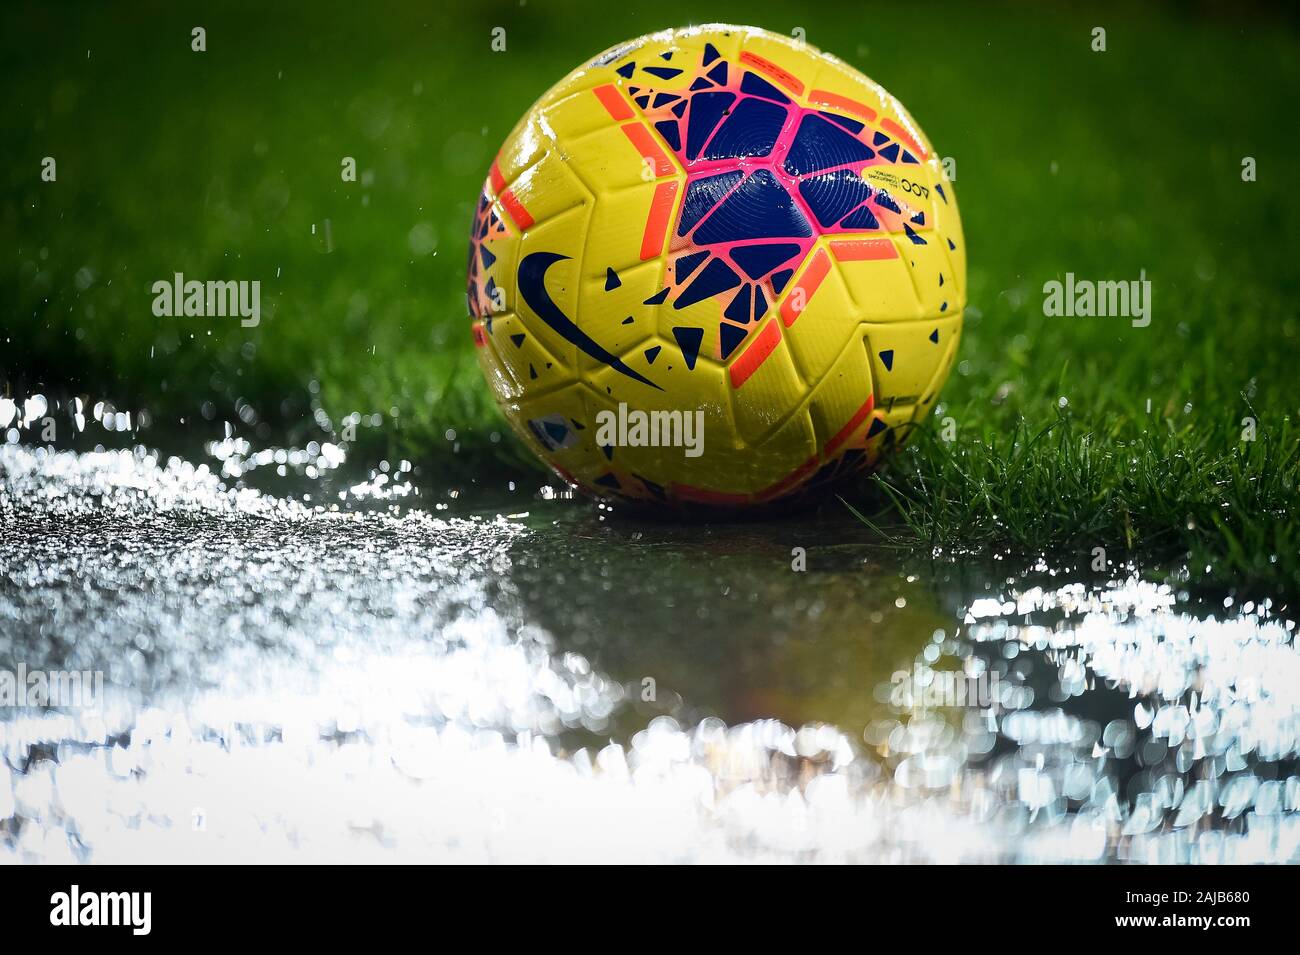 Turin, Italy - 23 November, 2019: Official match ball Nike Merlin Hi-Vis is  pictured near a puddle during the Serie A football match between Torino FC  and FC Internazionale. FC Internazionale won